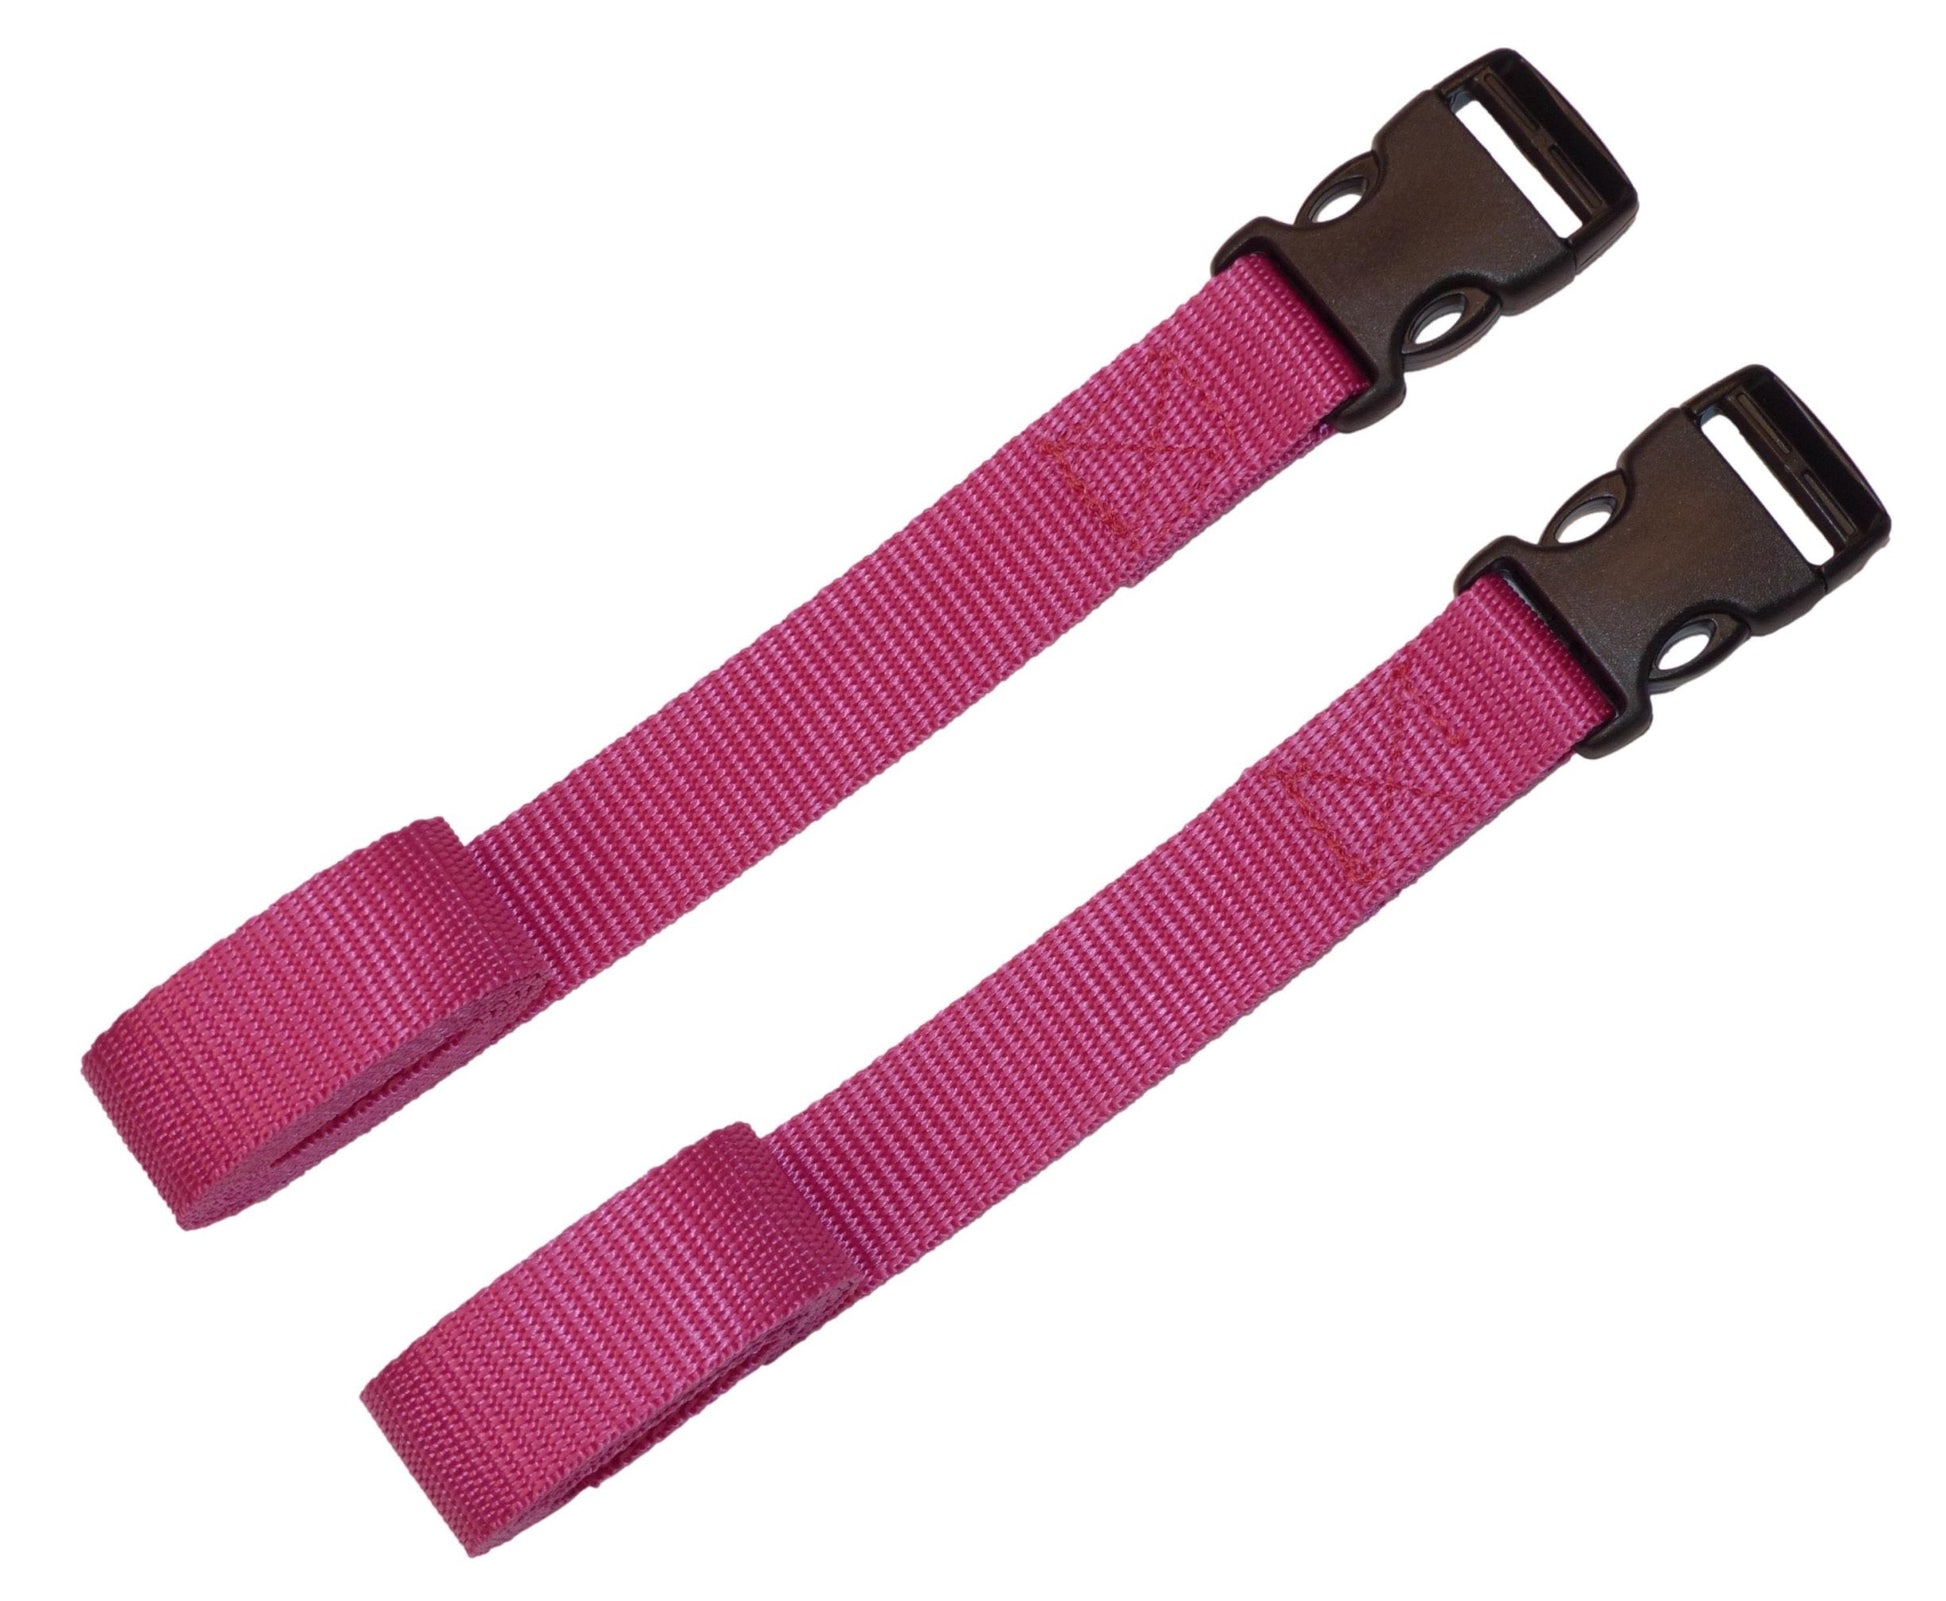 Benristraps 2 Pack Webbing Straps with Clips - Adjustable Luggage Straps in pink